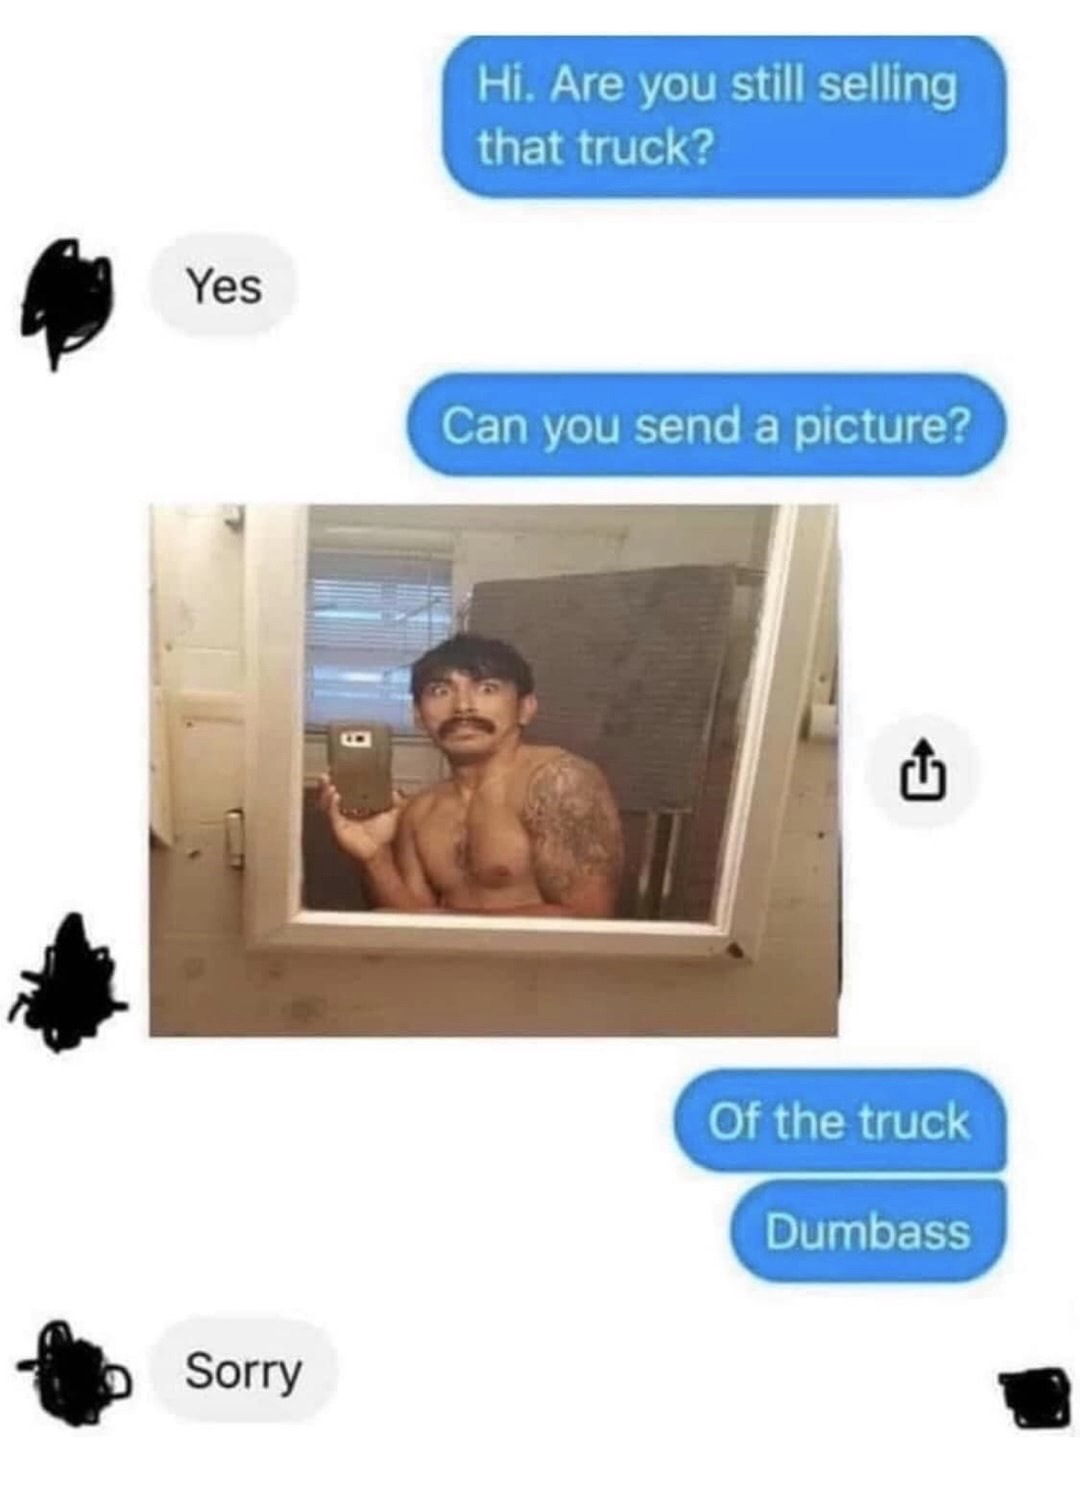 send a picture of the truck dumbass - Hi. Are you still selling that truck? Yes Can you send a picture? 6 Of the truck Dumbass Sorry